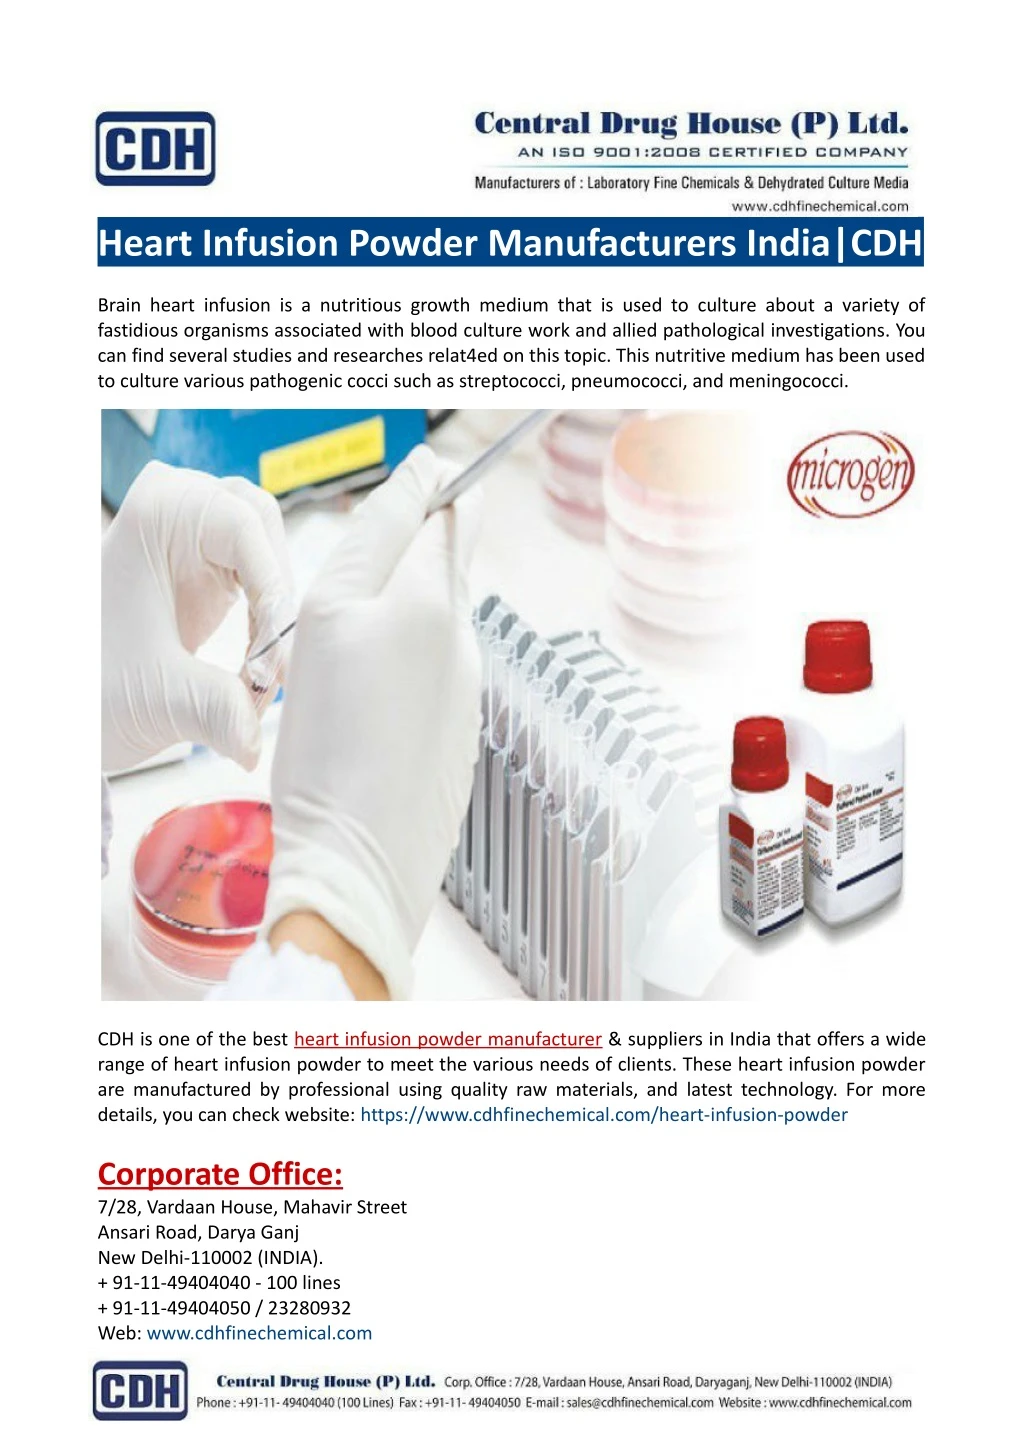 heart infusion powder manufacturers india cdh